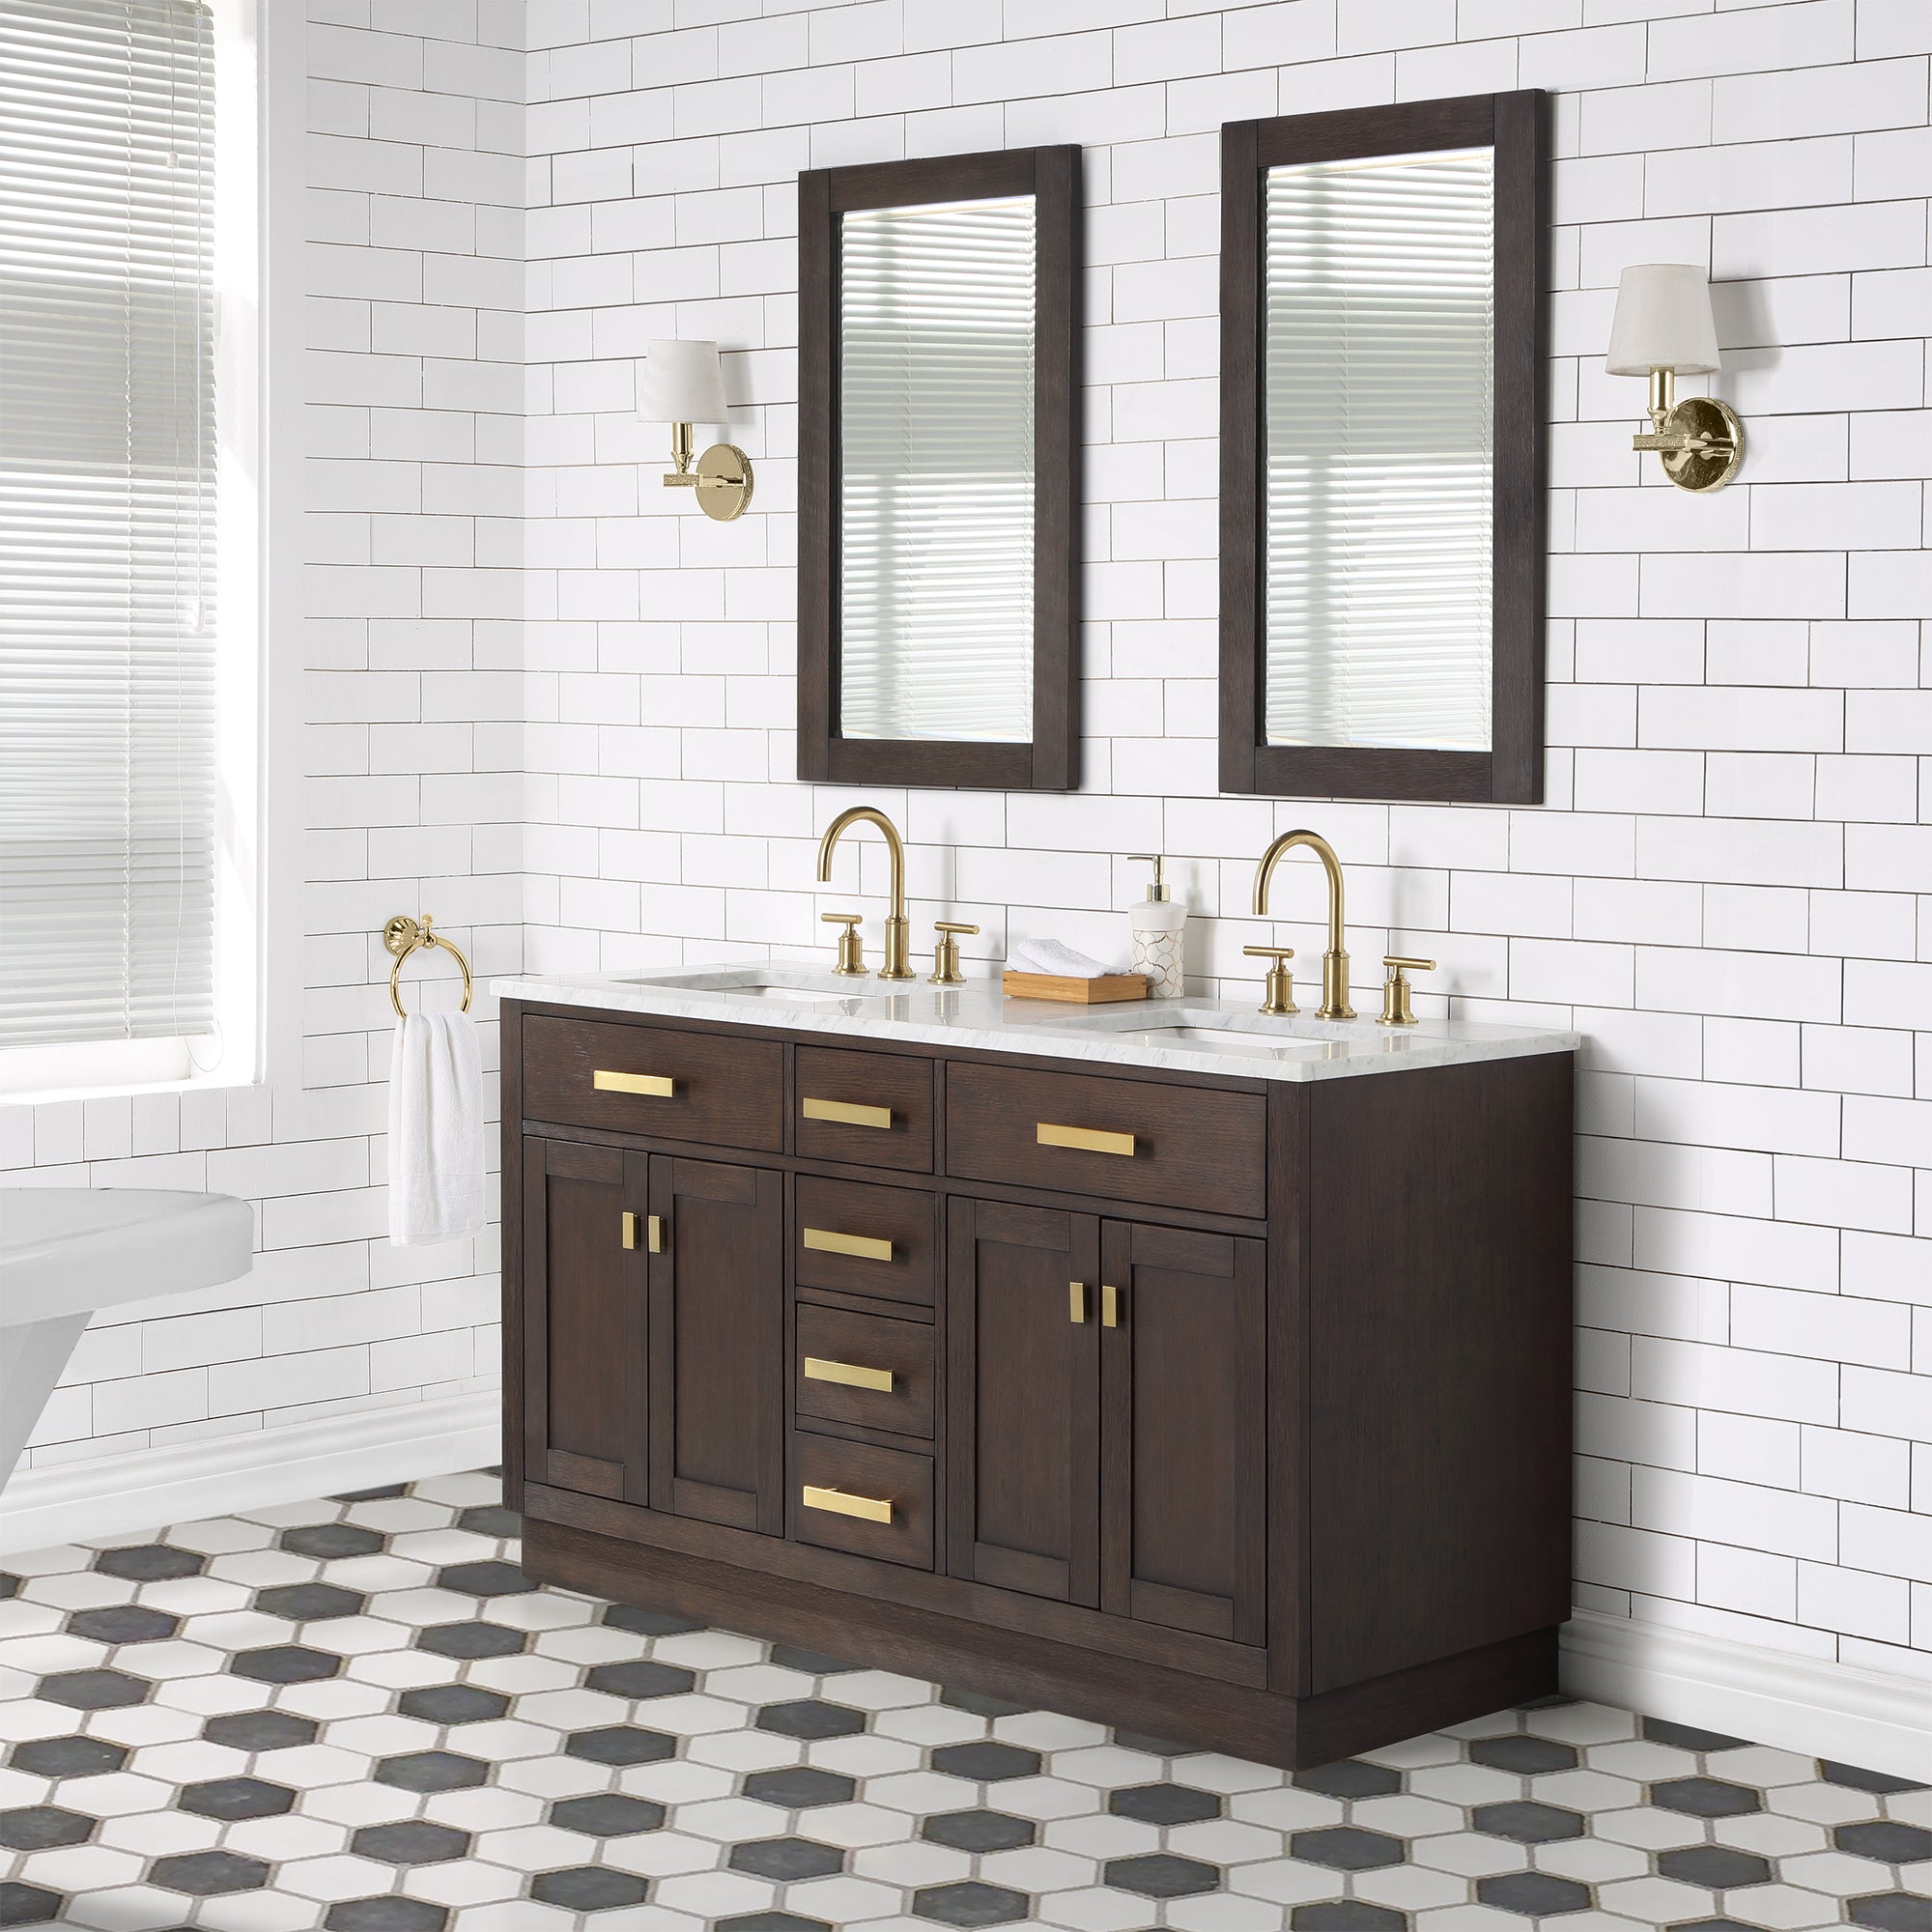 Water Creation | Chestnut 60 In. Double Sink Carrara White Marble Countertop Vanity In Brown Oak with Grooseneck Faucets | CH60CW06BK-000BL1406